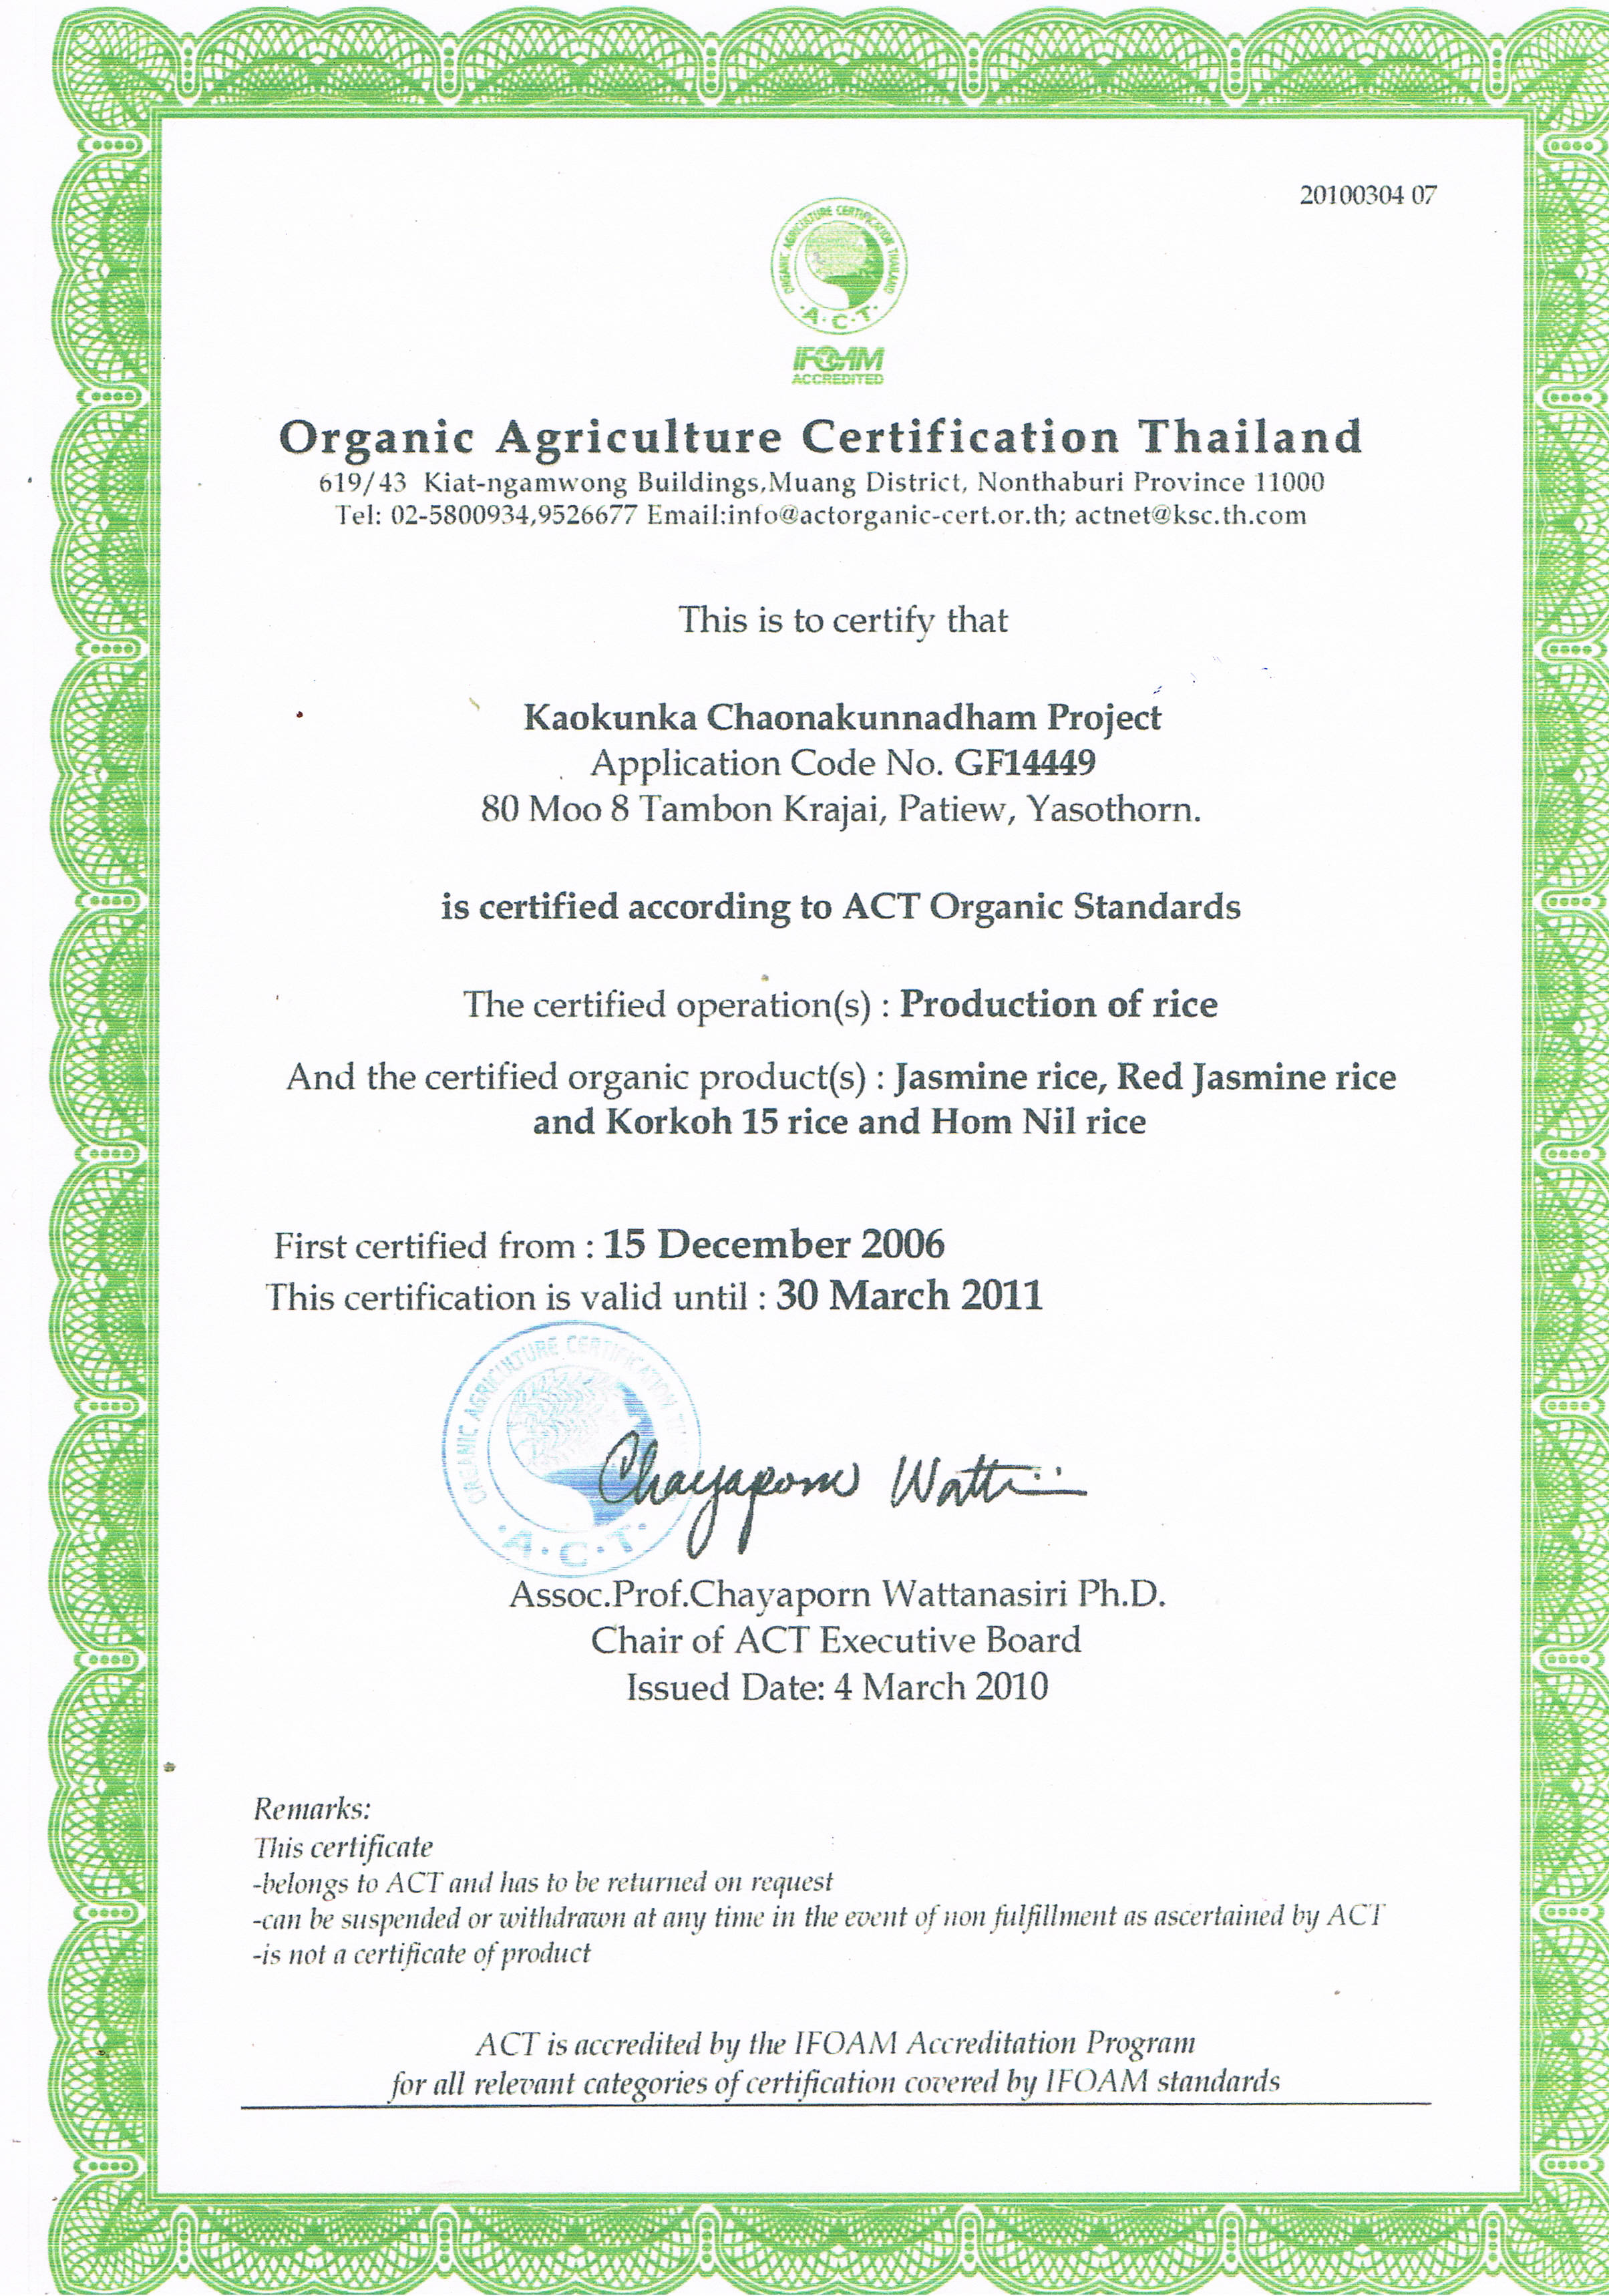 Organic Agriculture Certification Thailand